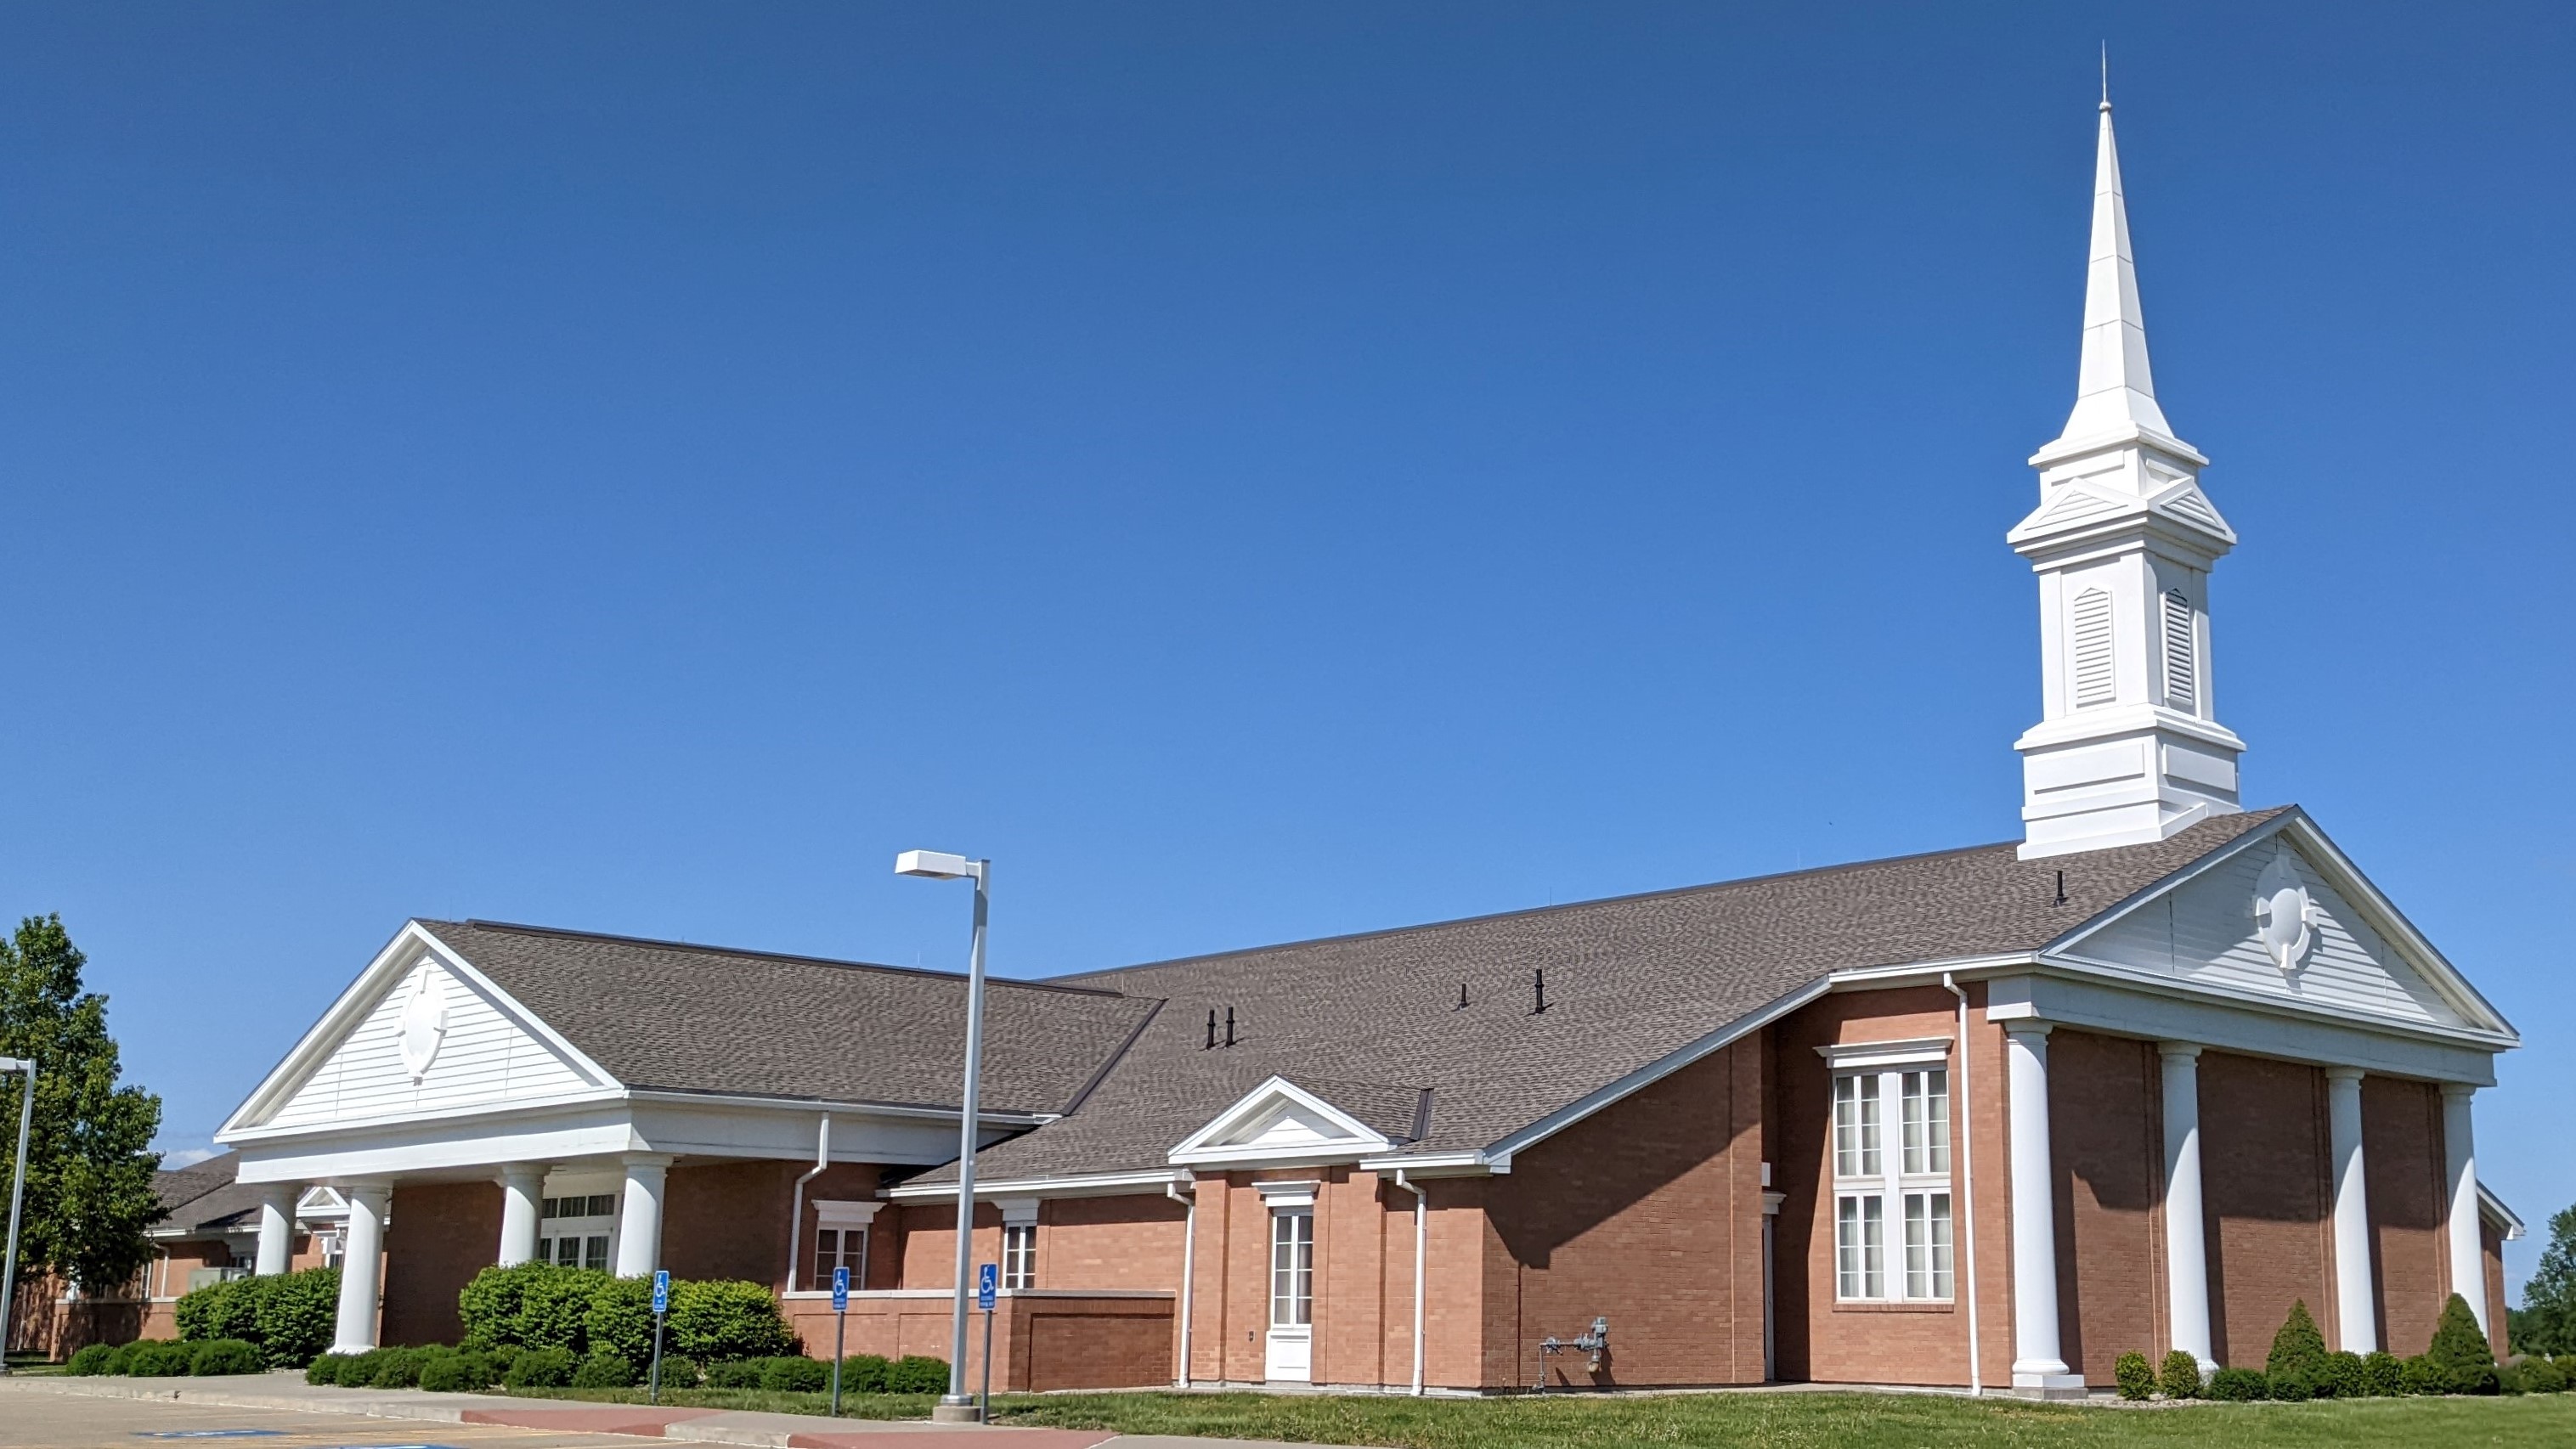 The Church of Jesus Christ of Latter-day Saints meetinghouse for the Far West Stake Fishing River Ward, the Far West Stake Crooked River Ward, and the Liberty Stake Kearney Ward located at 202 West 19th Street, Kearney, MO